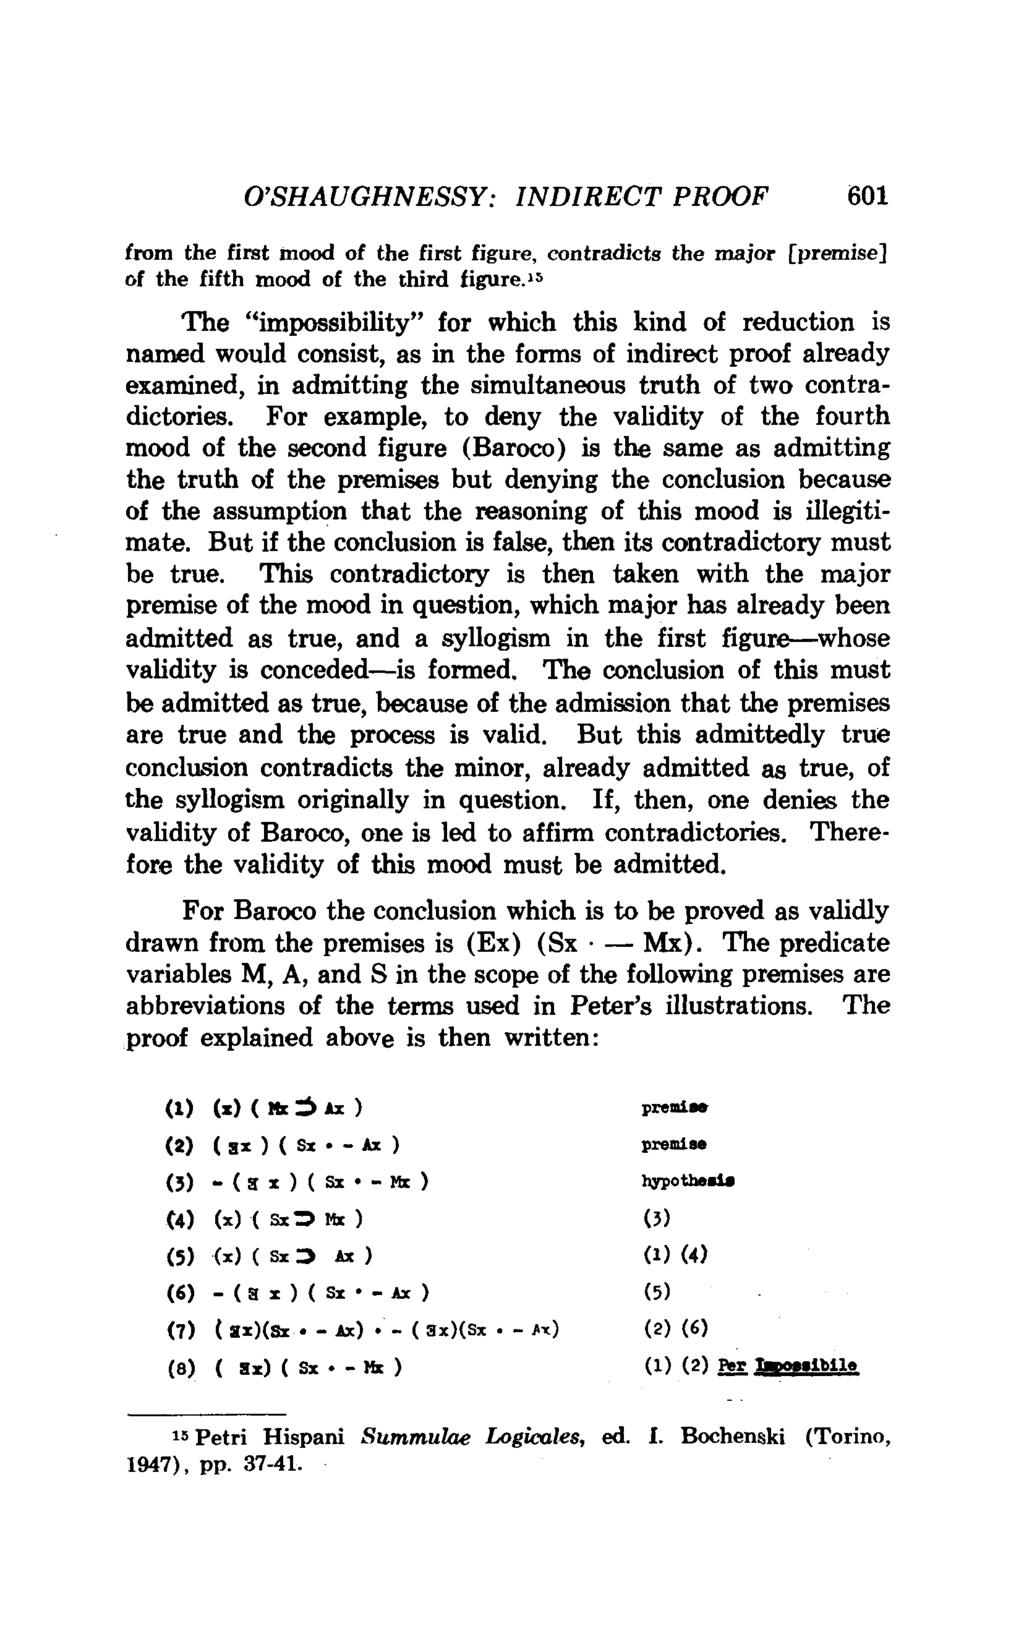 O'SHAUGHNESSY: INDIRECT PROOF 601 fmm the first mood of the first figure, contradicts the major [premise] of the fifth mood of the third figure.